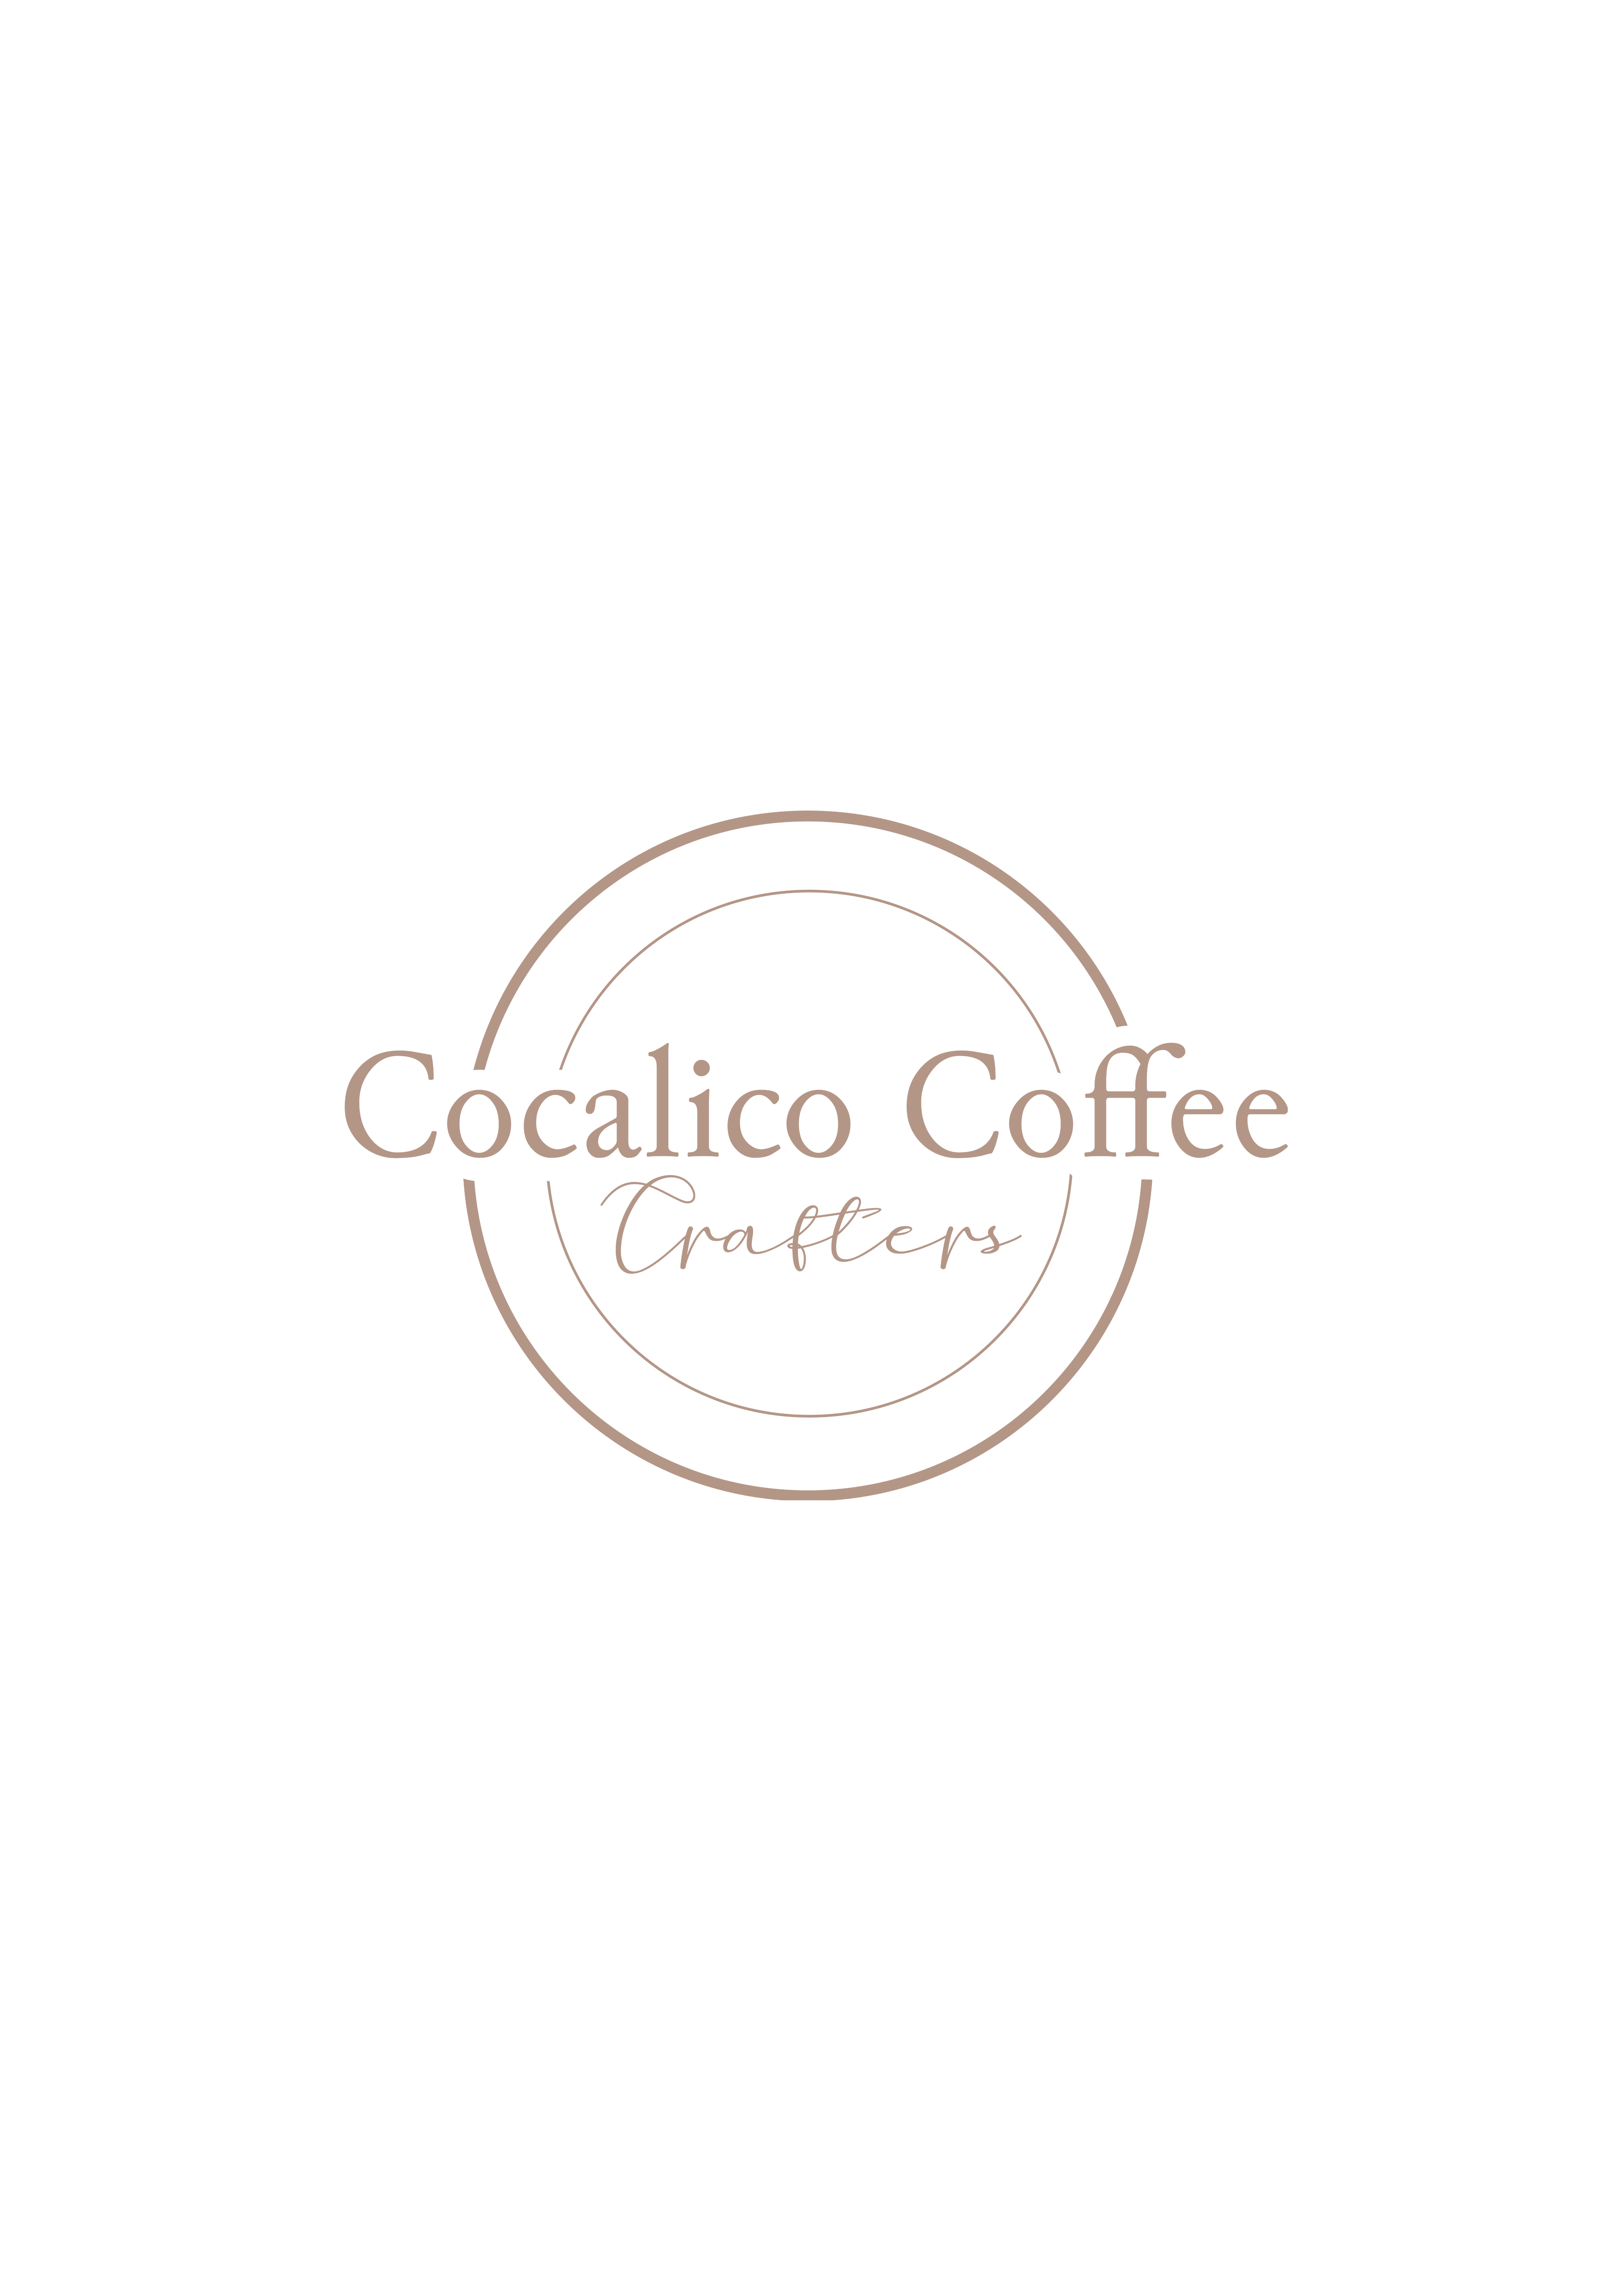 Cocalico Coffee Crafters